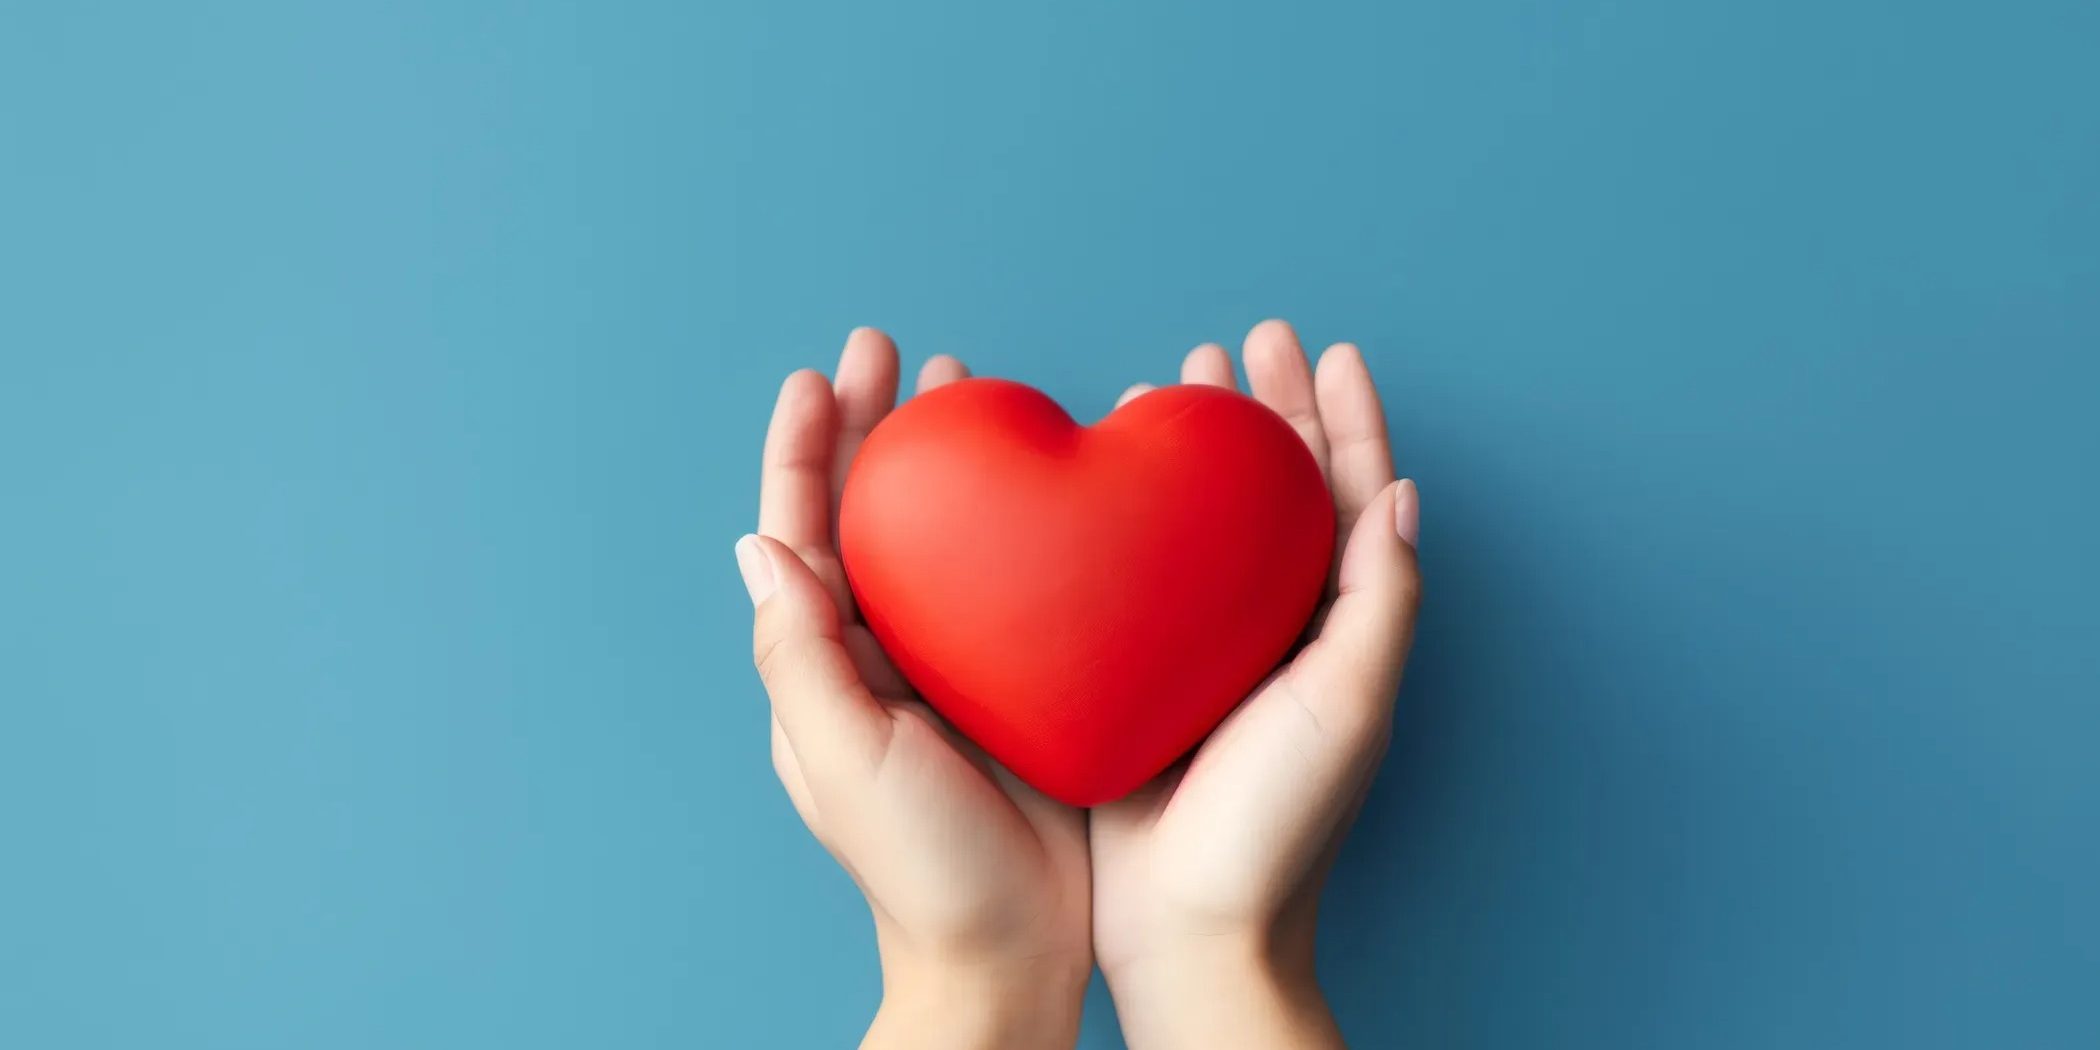 Two hands cradling a red heart against a blue background.